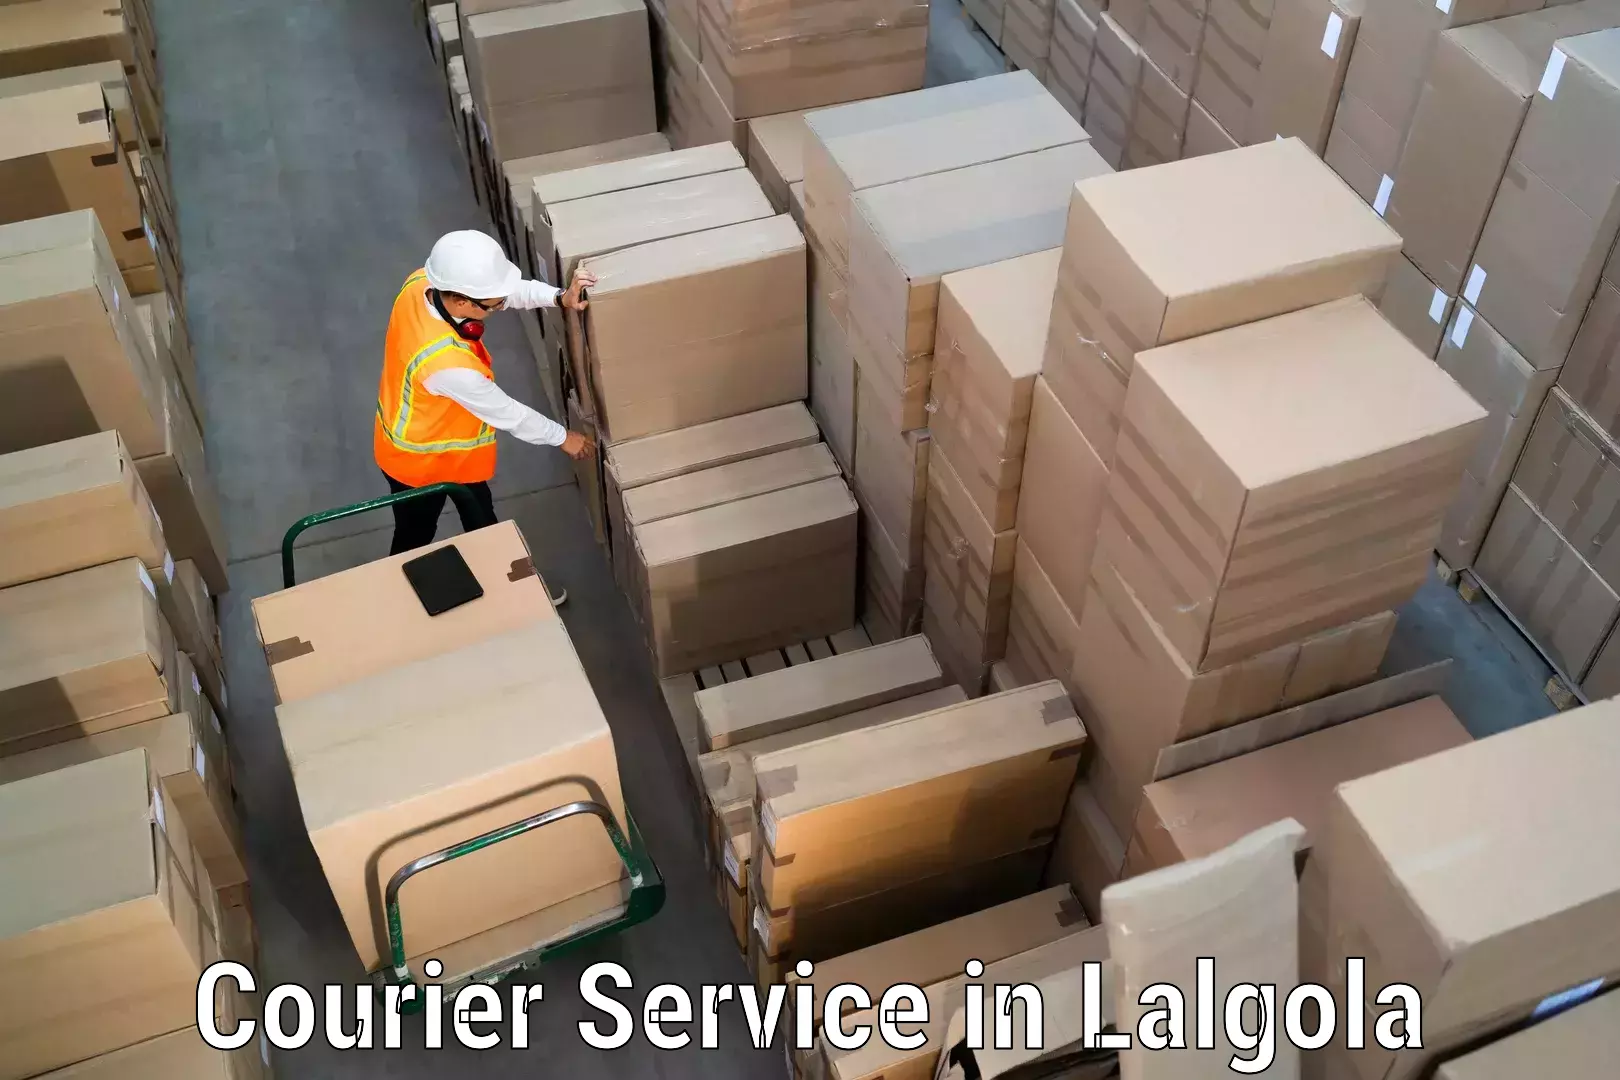 Advanced courier platforms in Lalgola